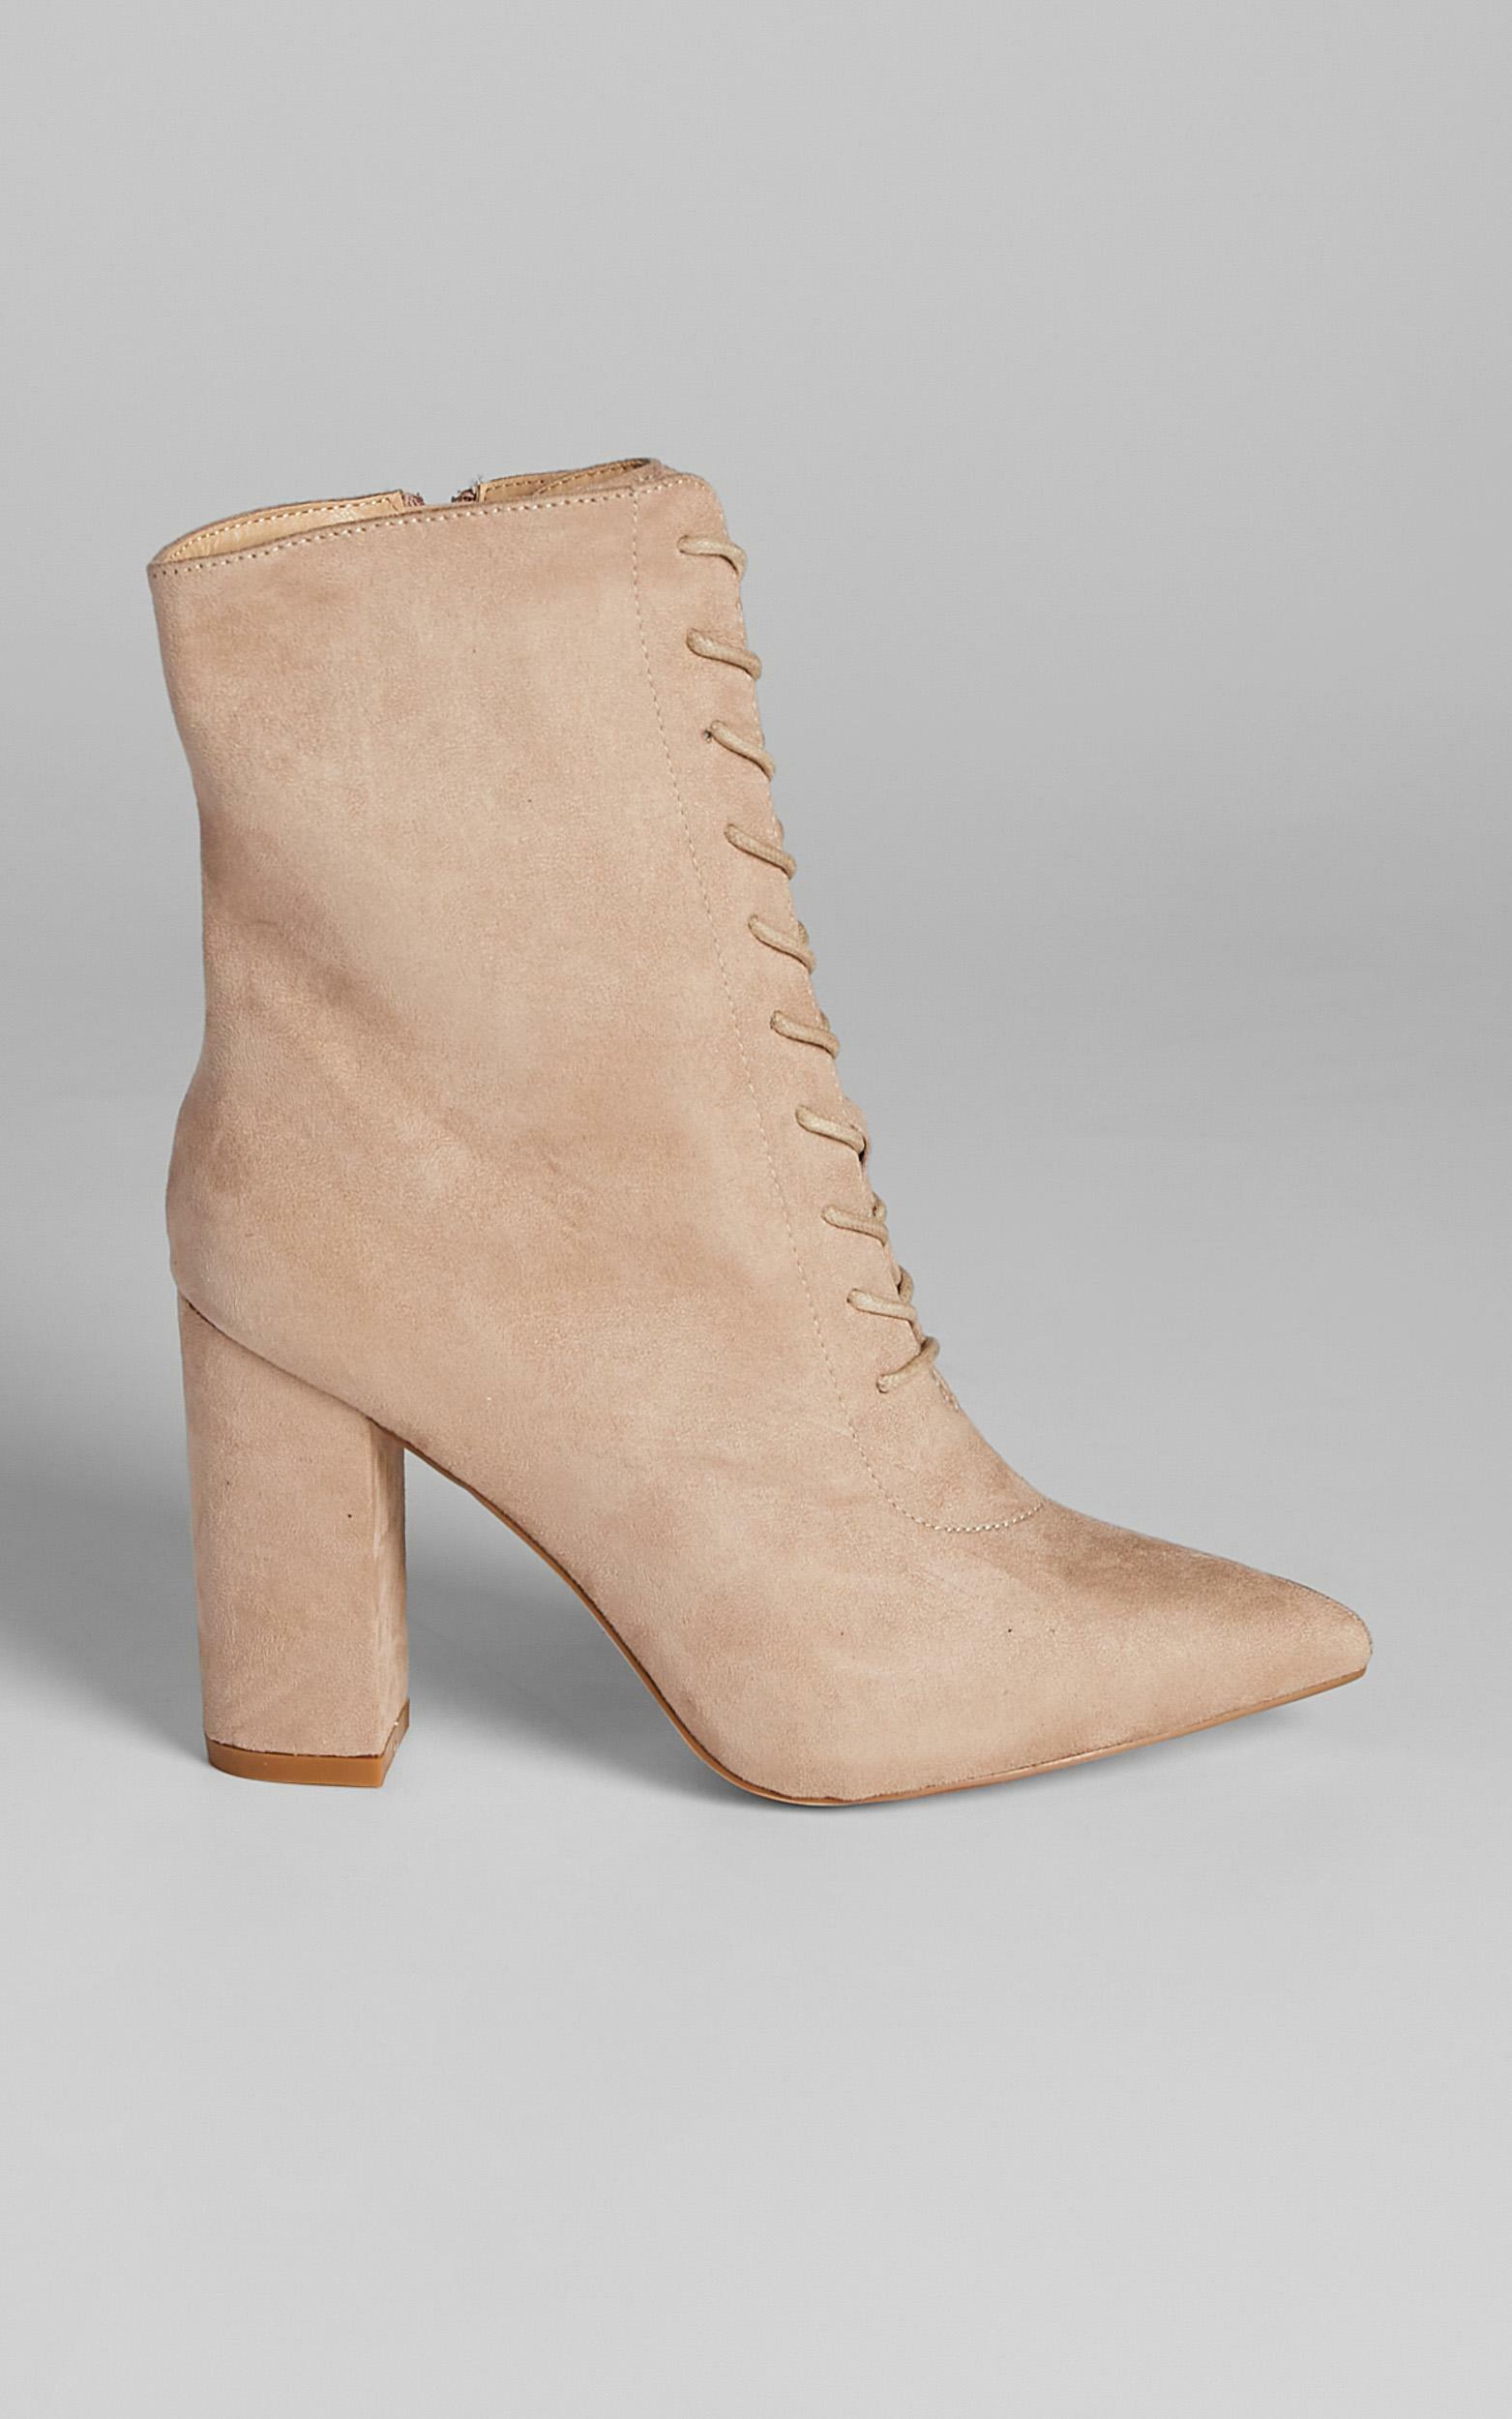 Verali - Danielle Boots in Blush Micro - 05, PNK2, hi-res image number null